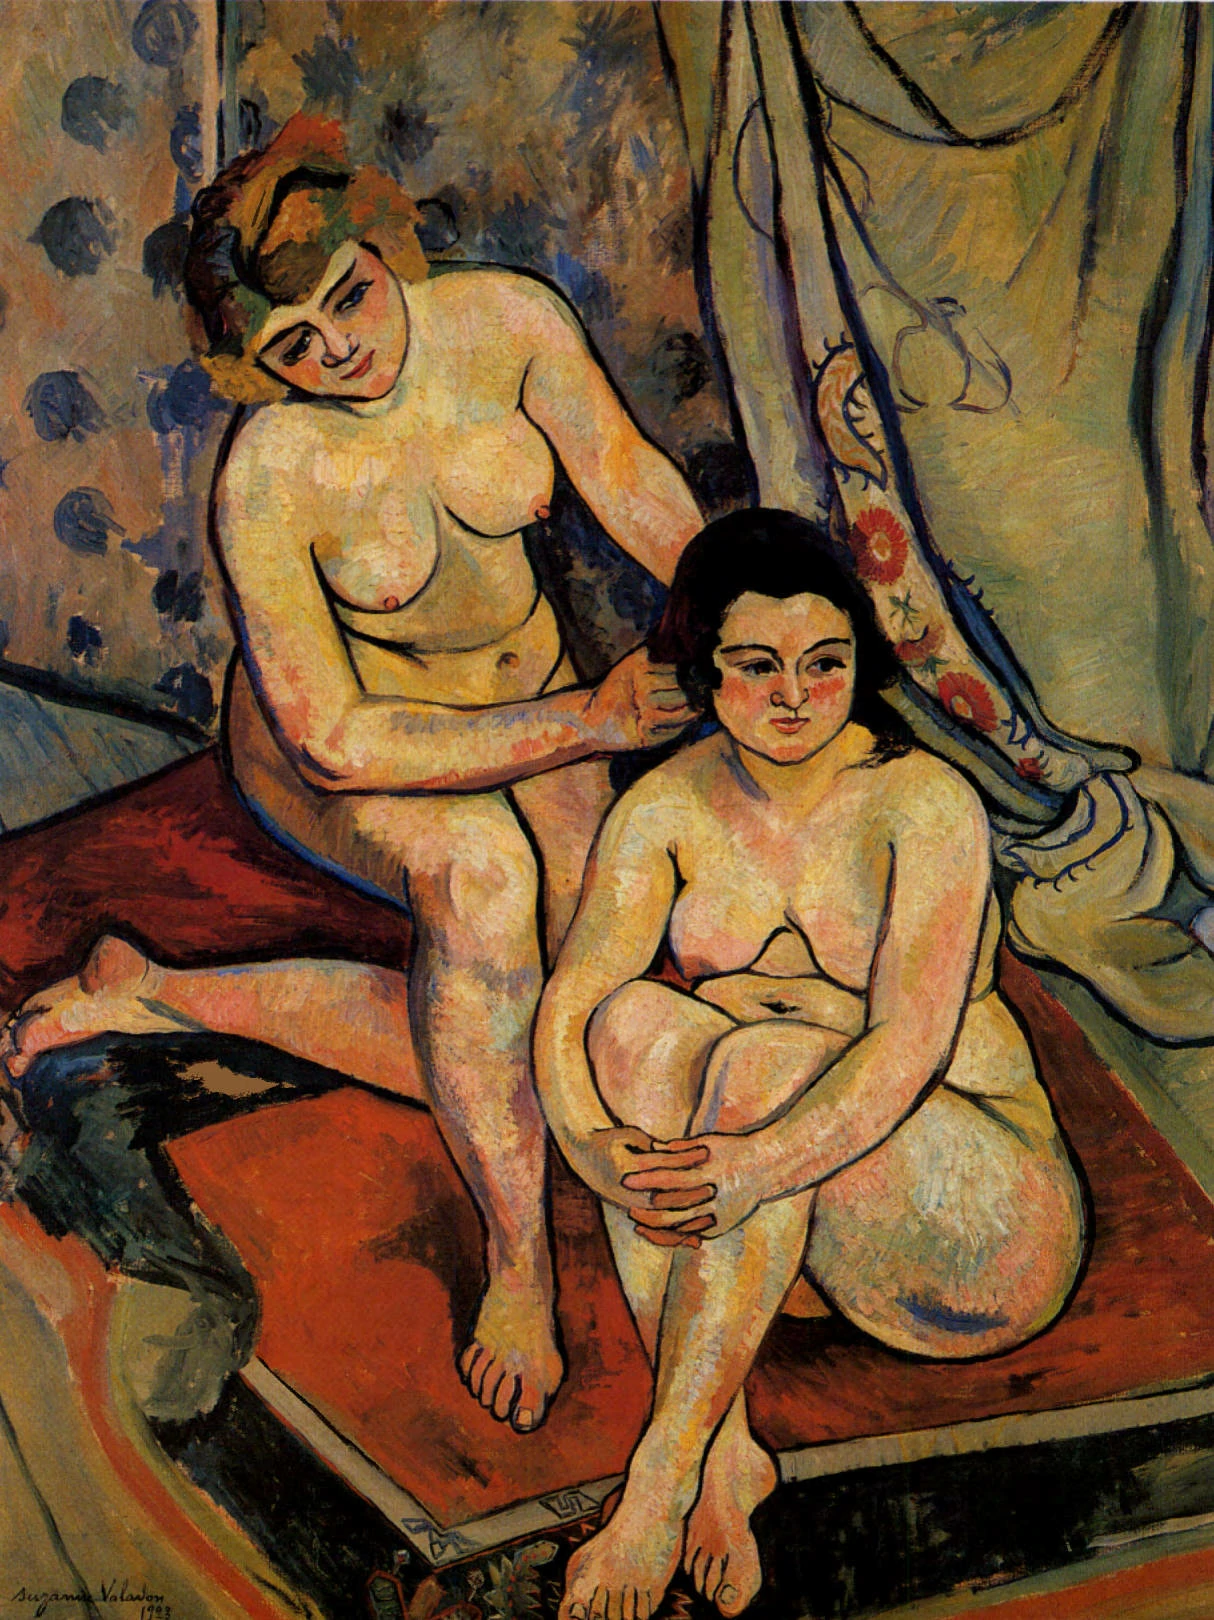 Suzanne Valadon, The Artists